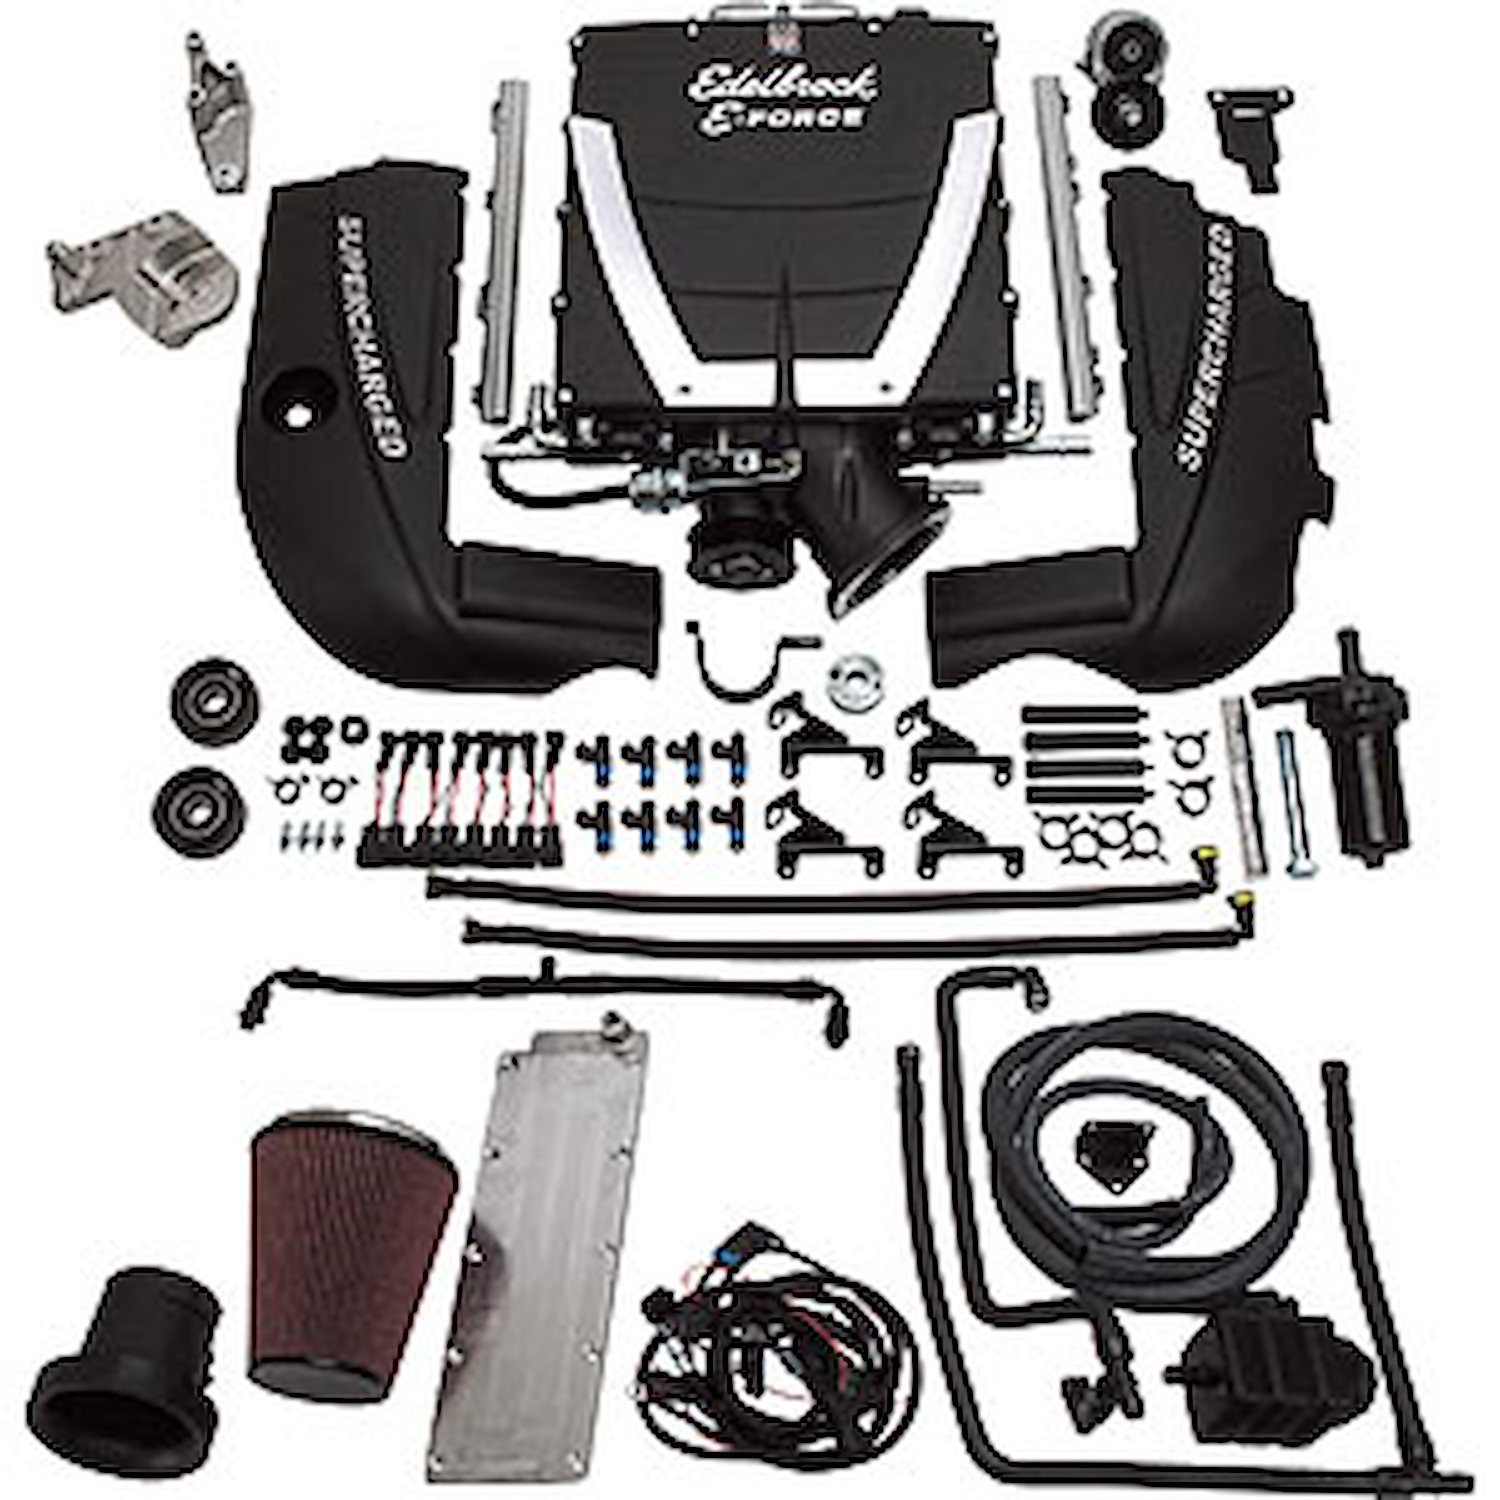 E-Force Universal Supercharger Kit for GM Gen IV LS3 Engine with Truck Accessory Drives